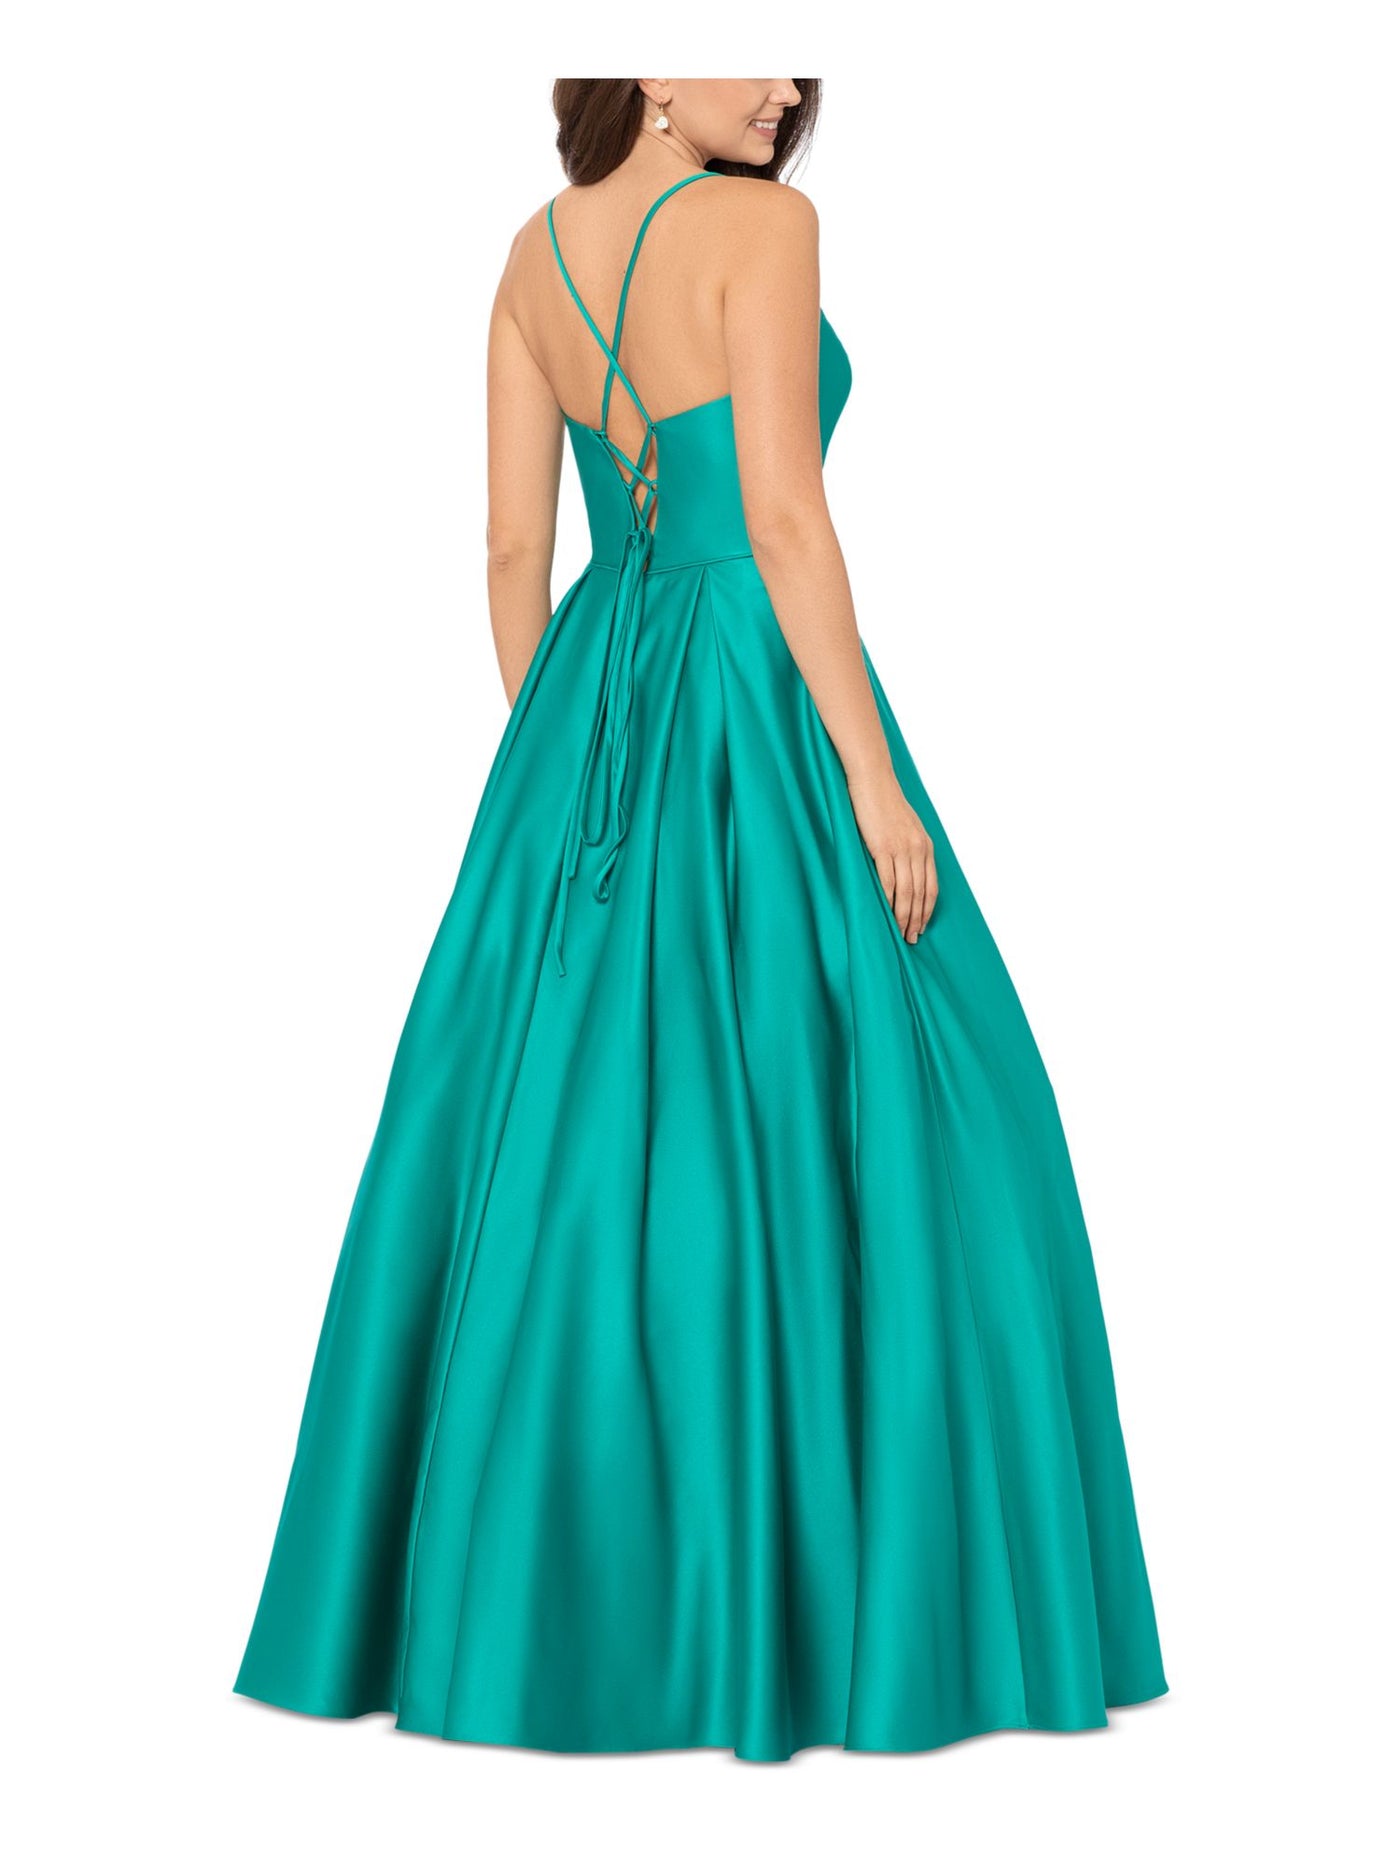 BLONDIE NITES Womens Teal Zippered Pleated Lace-up Back Pocketed Lined Spaghetti Strap V Neck Full-Length Prom Gown Dress Juniors 7